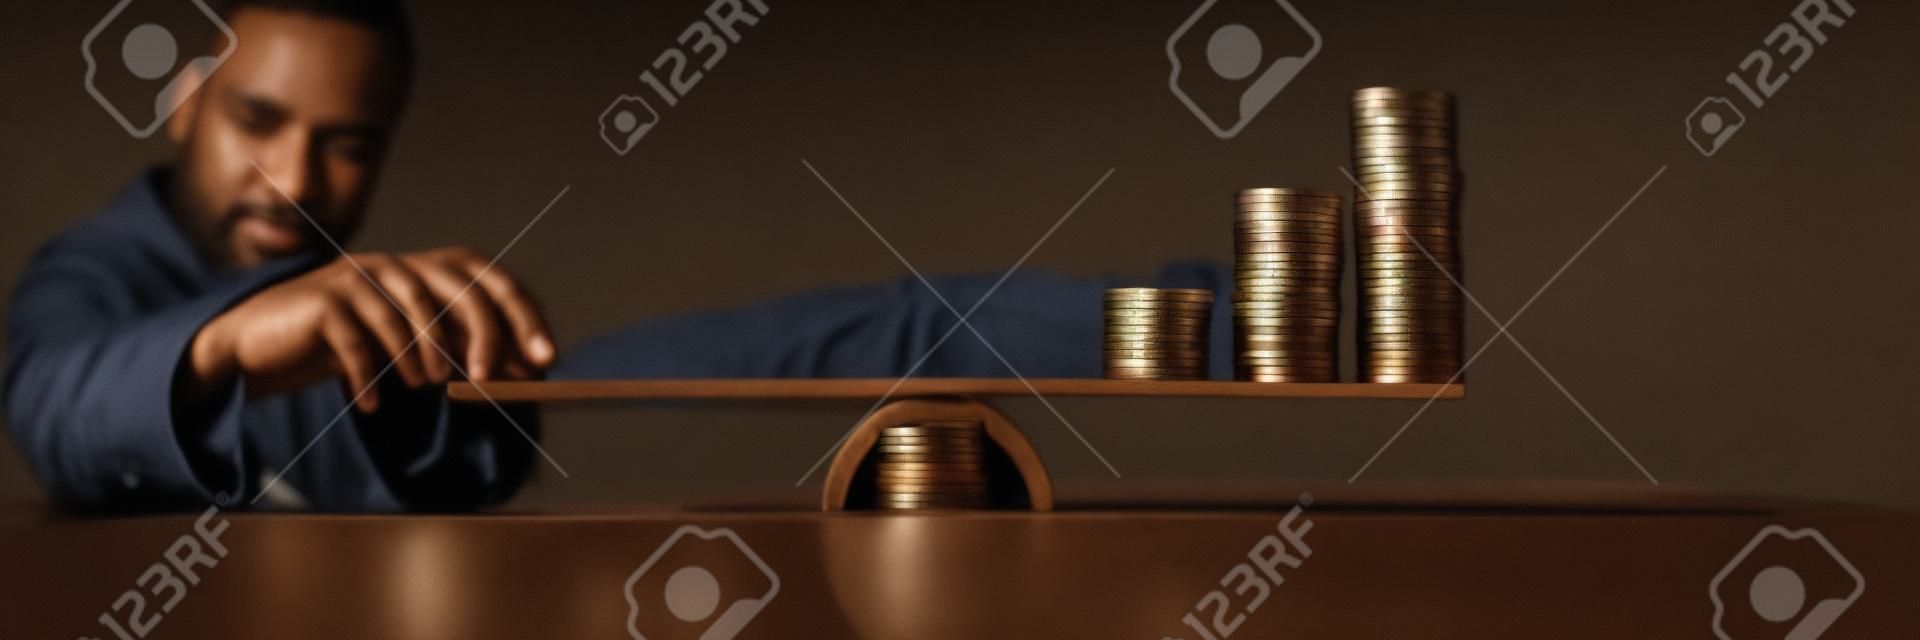 Man Holding Two Coin Stacks To Compare